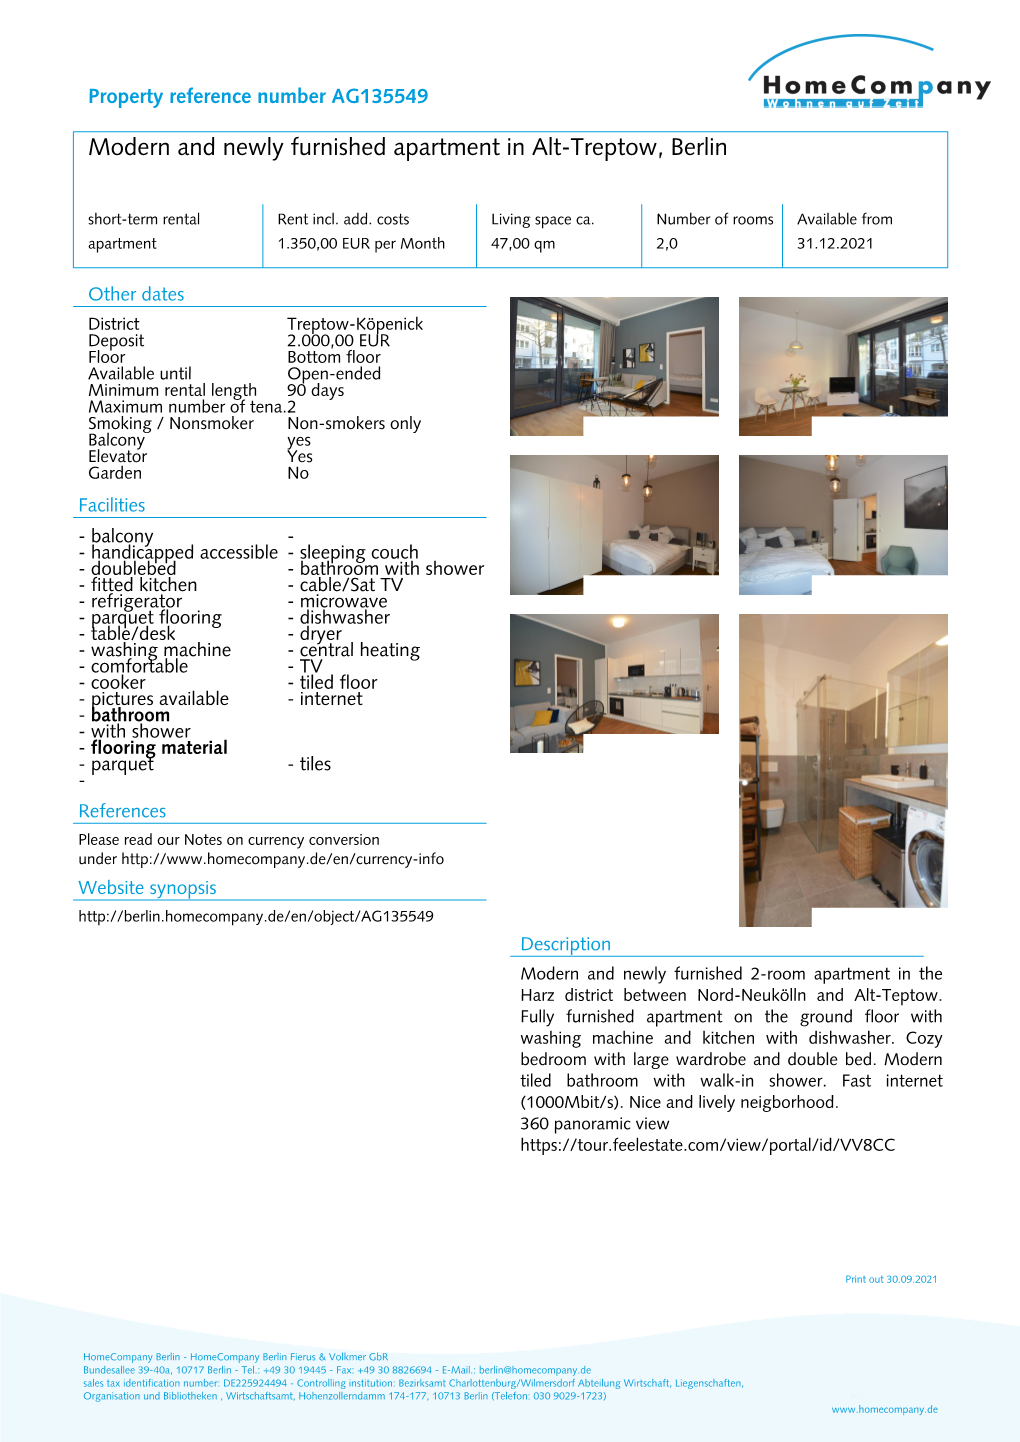 Modern and Newly Furnished Apartment in Alt-Treptow, Berlin